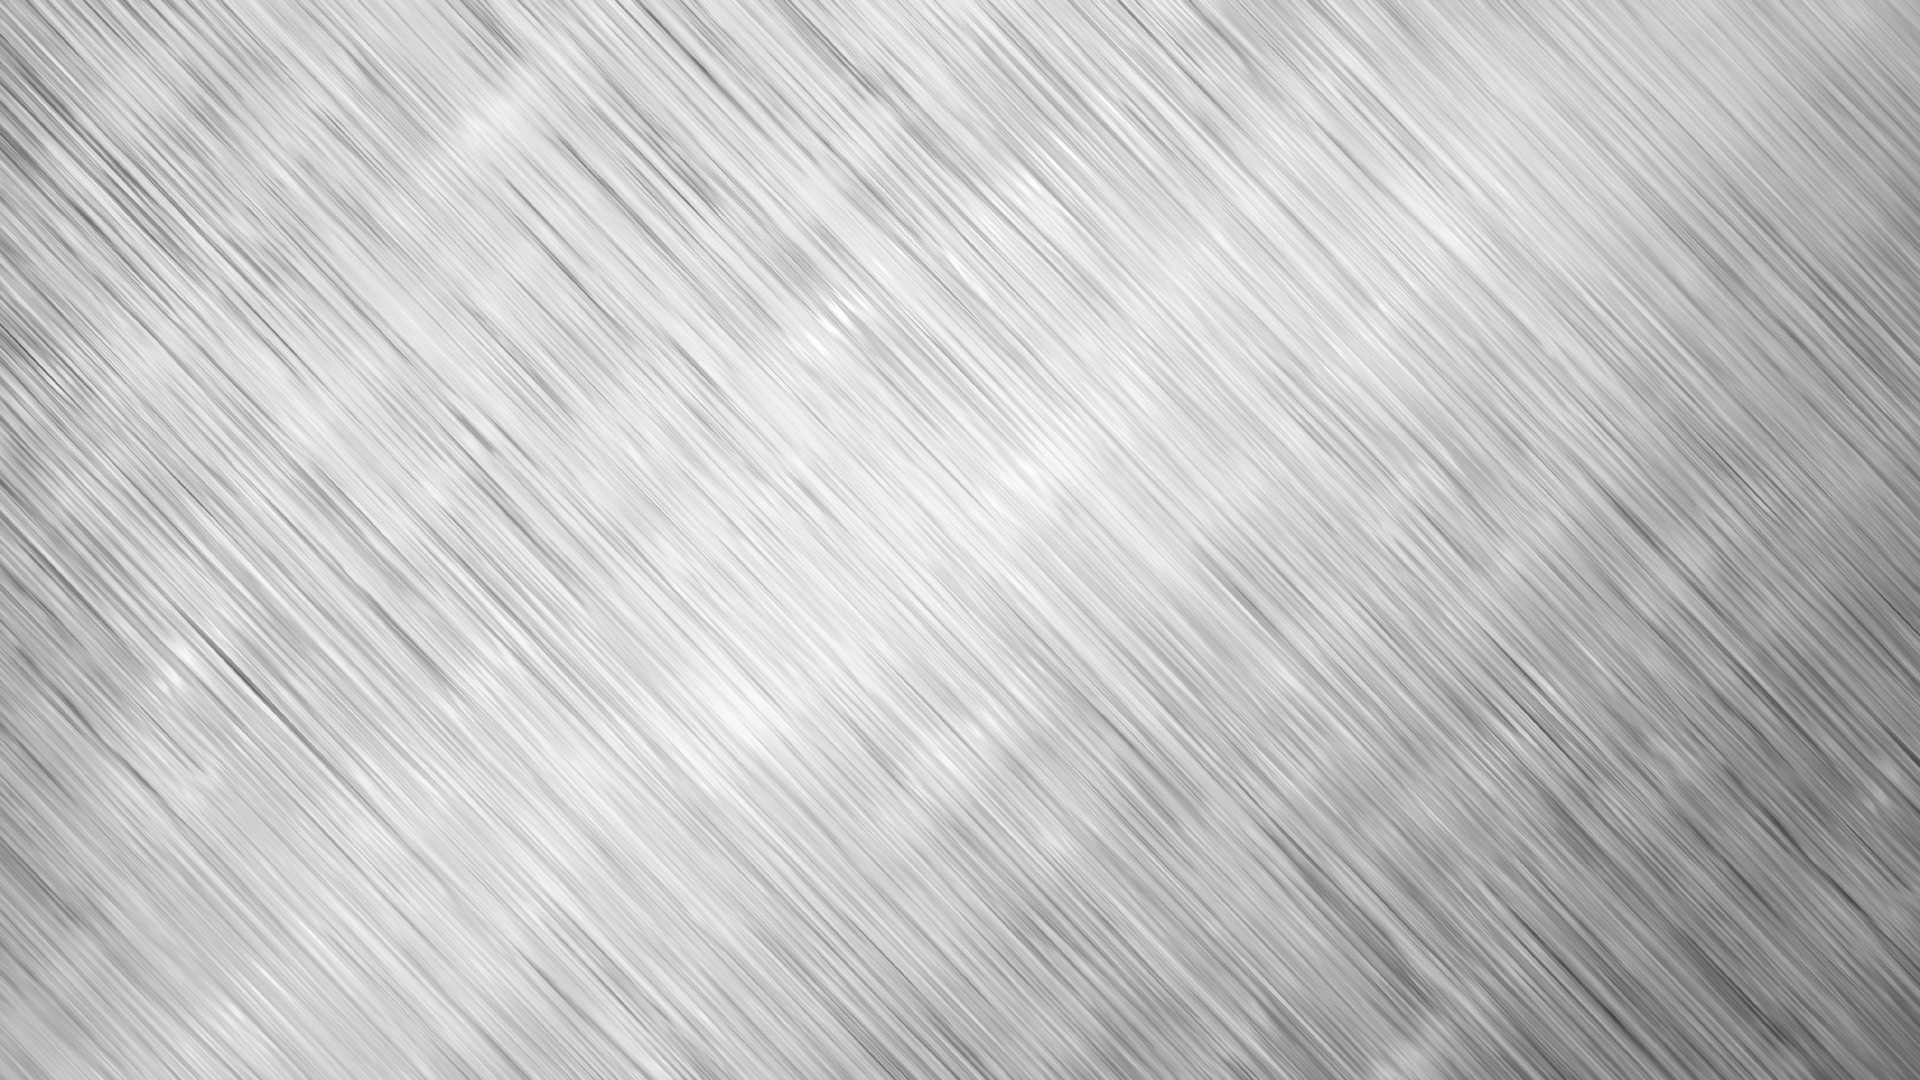 Grey and White Striped Textile. Wallpaper in 1920x1080 Resolution